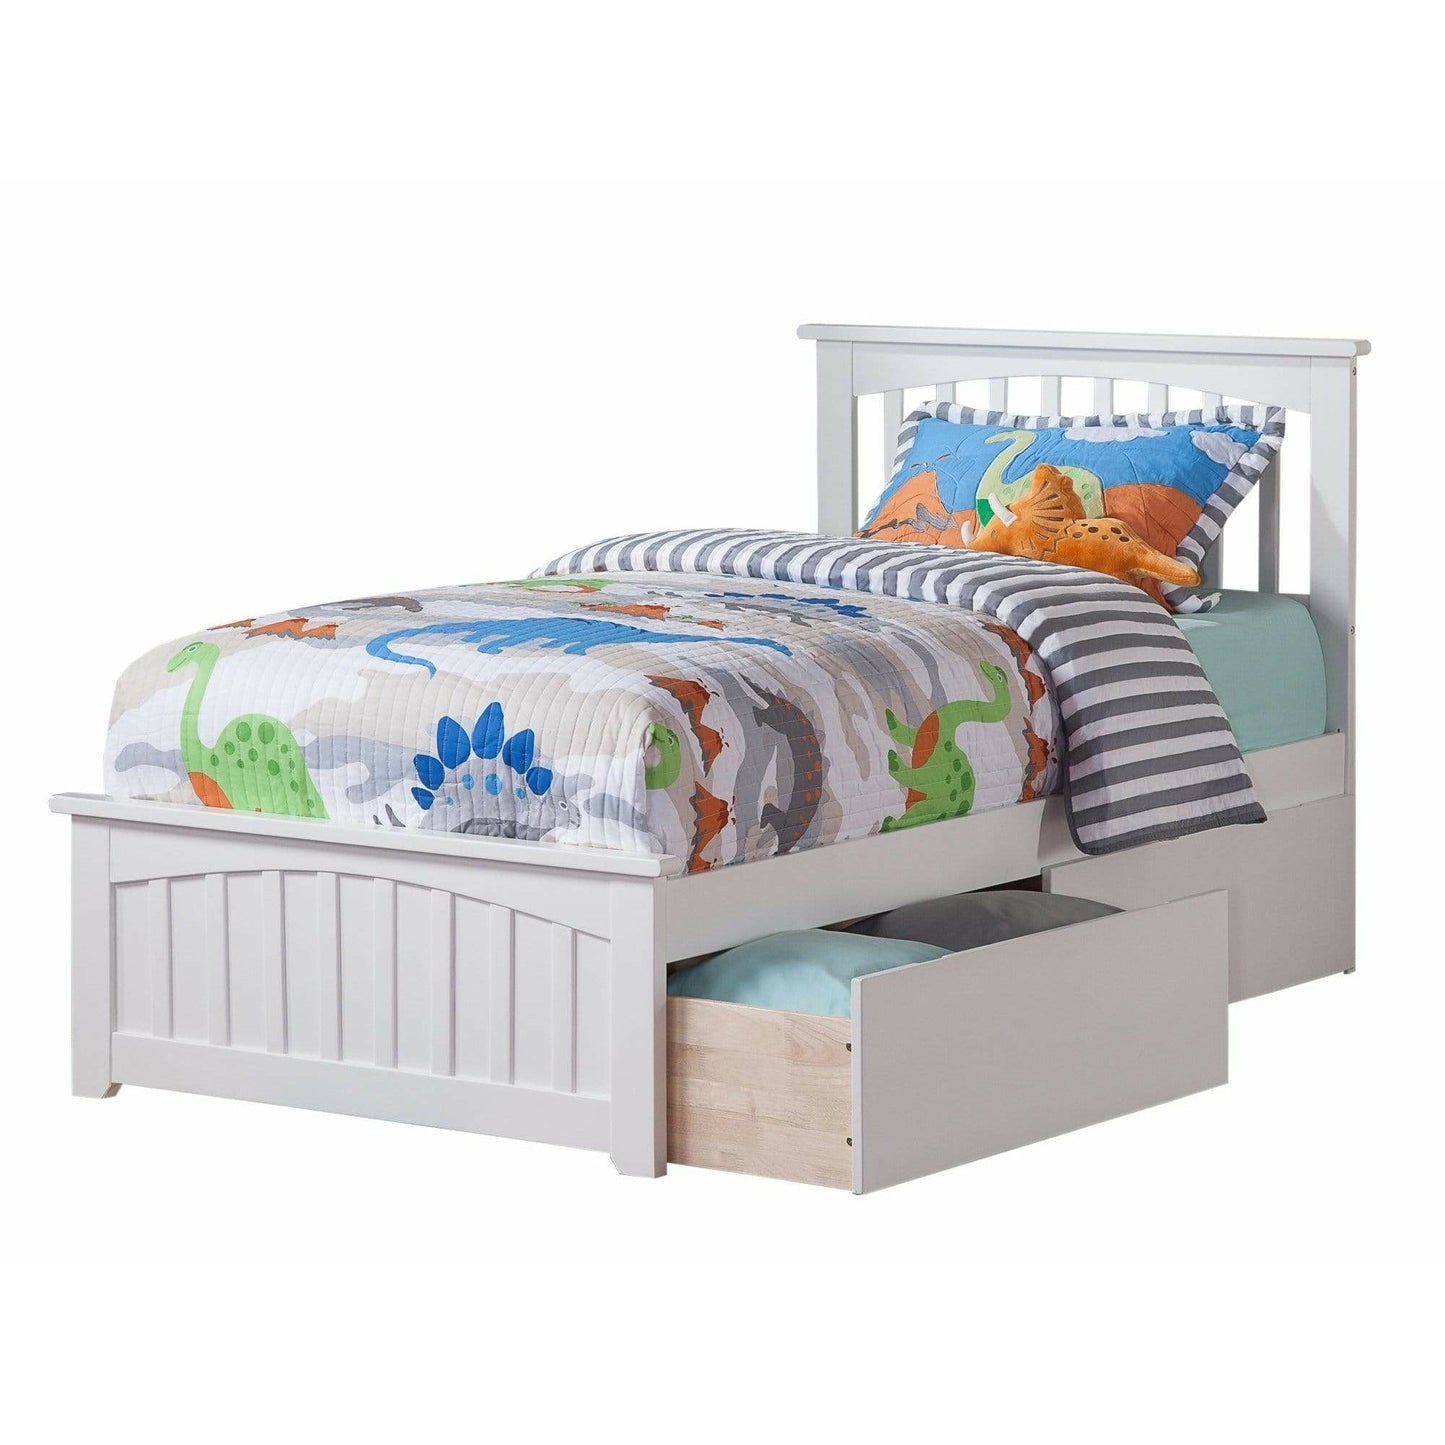 Atlantic Furniture Bed white Mission Twin Platform Bed with Matching Foot Board with 2 Urban Bed Drawers in Espresso